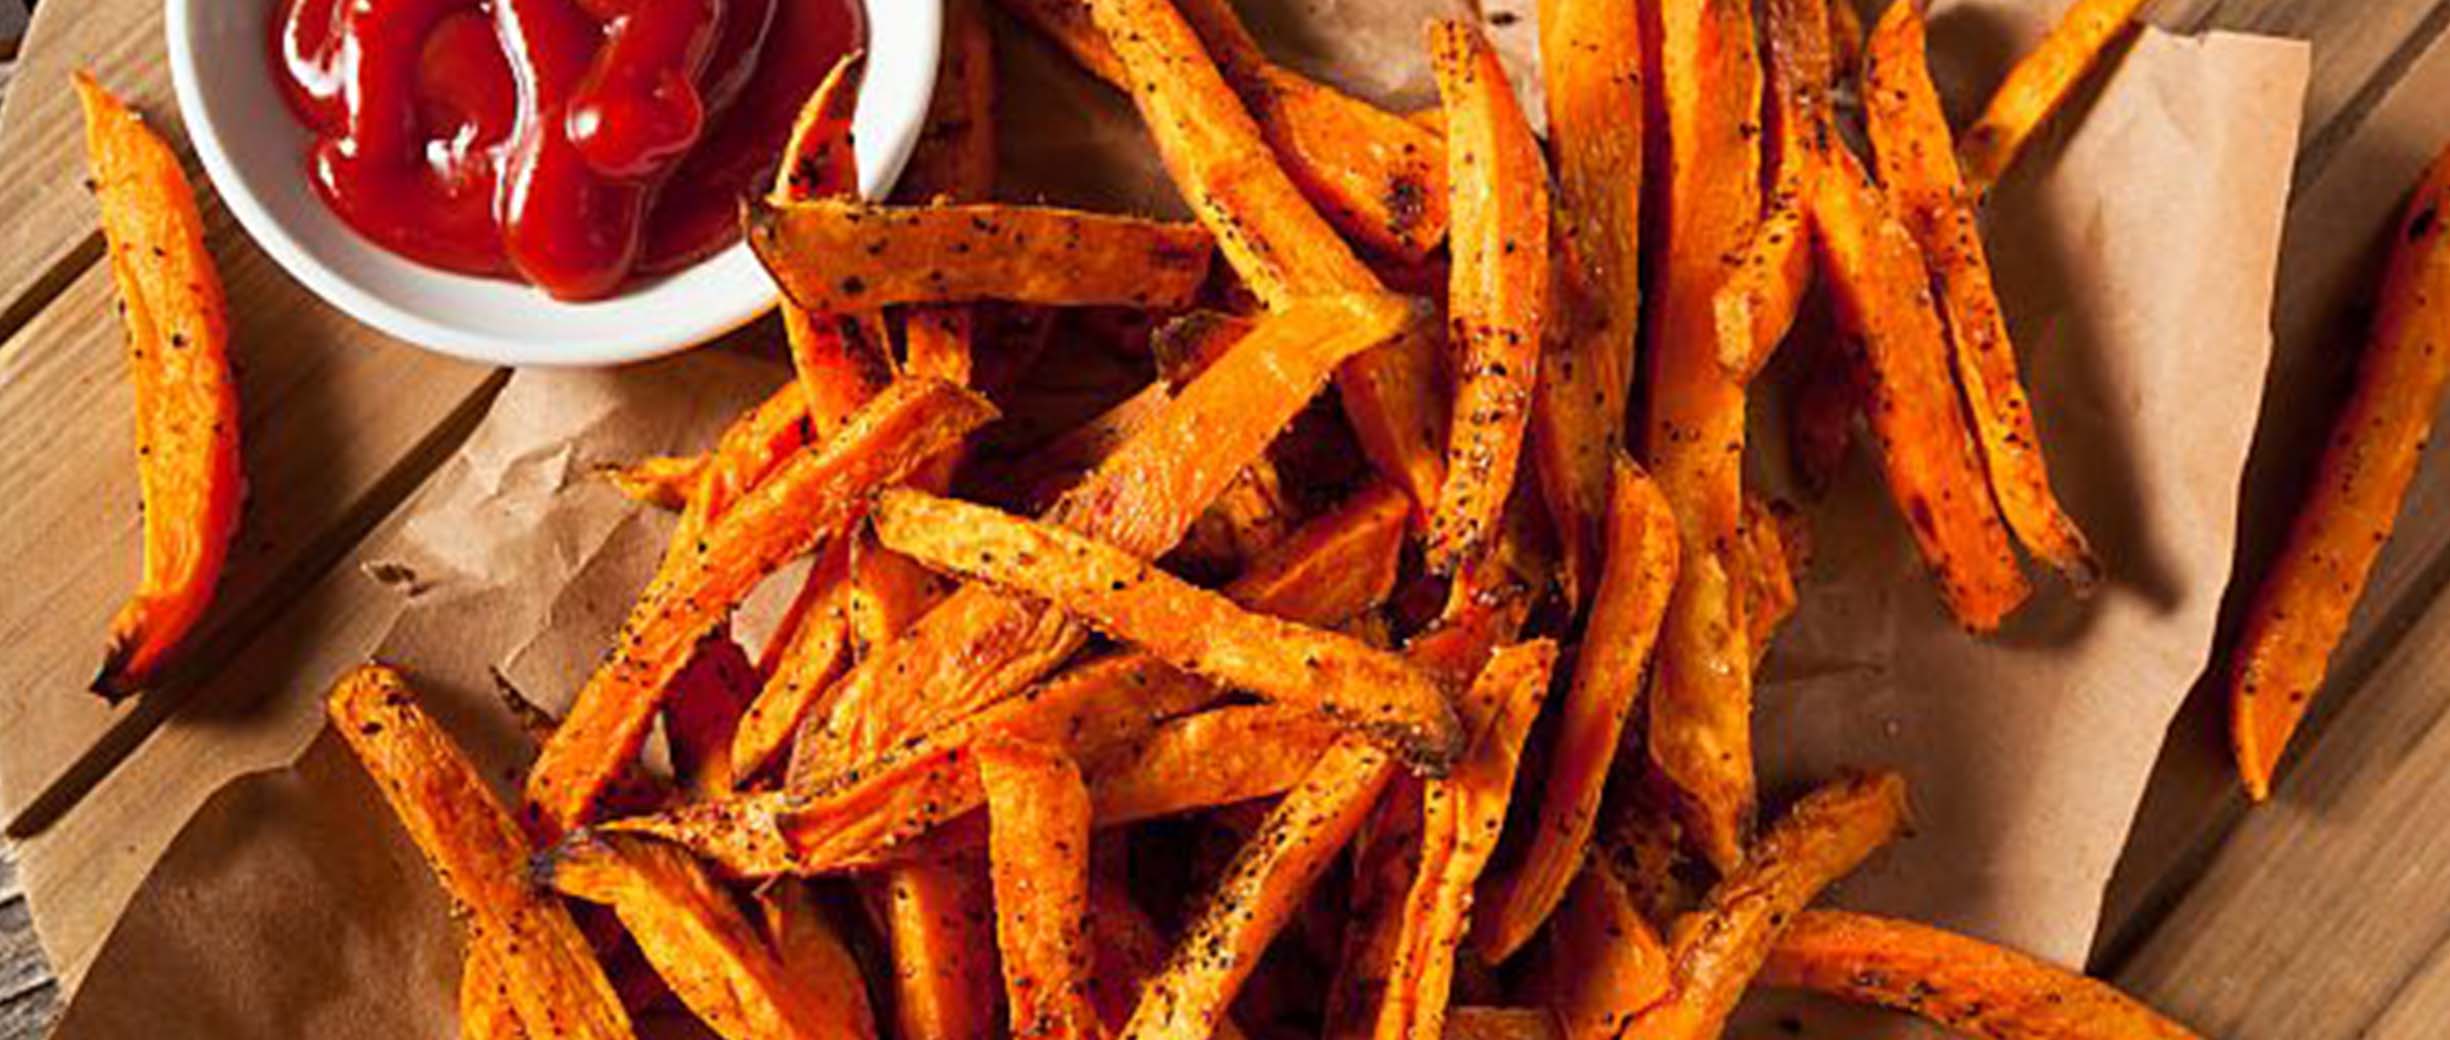 35 Ways to Get Your Kids to Eat Sweet Potatoes